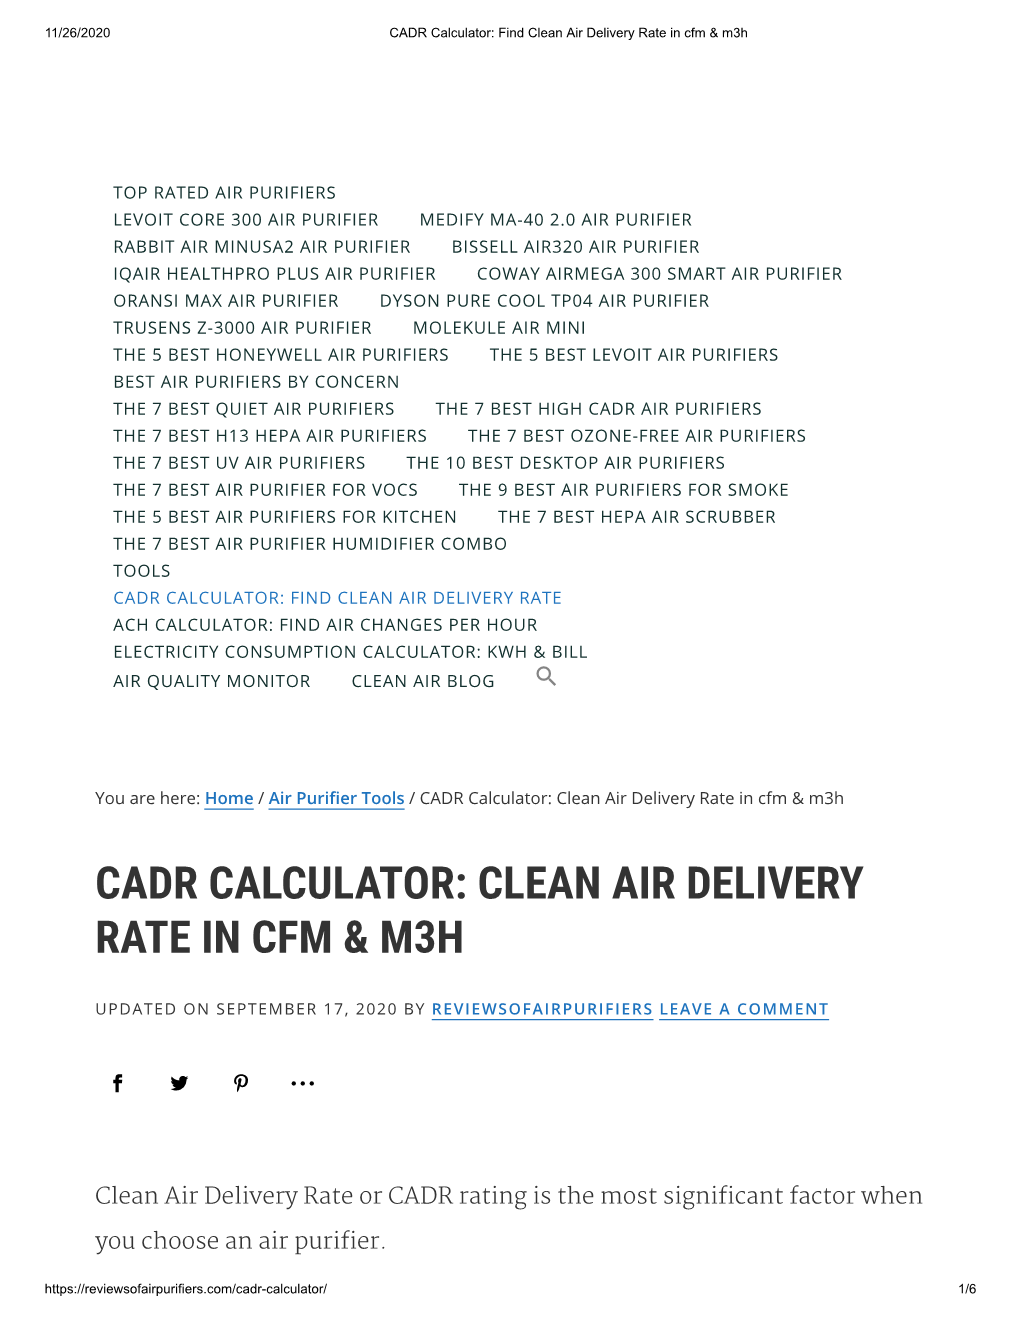 Cadr Calculator: Clean Air Delivery Rate in Cfm &